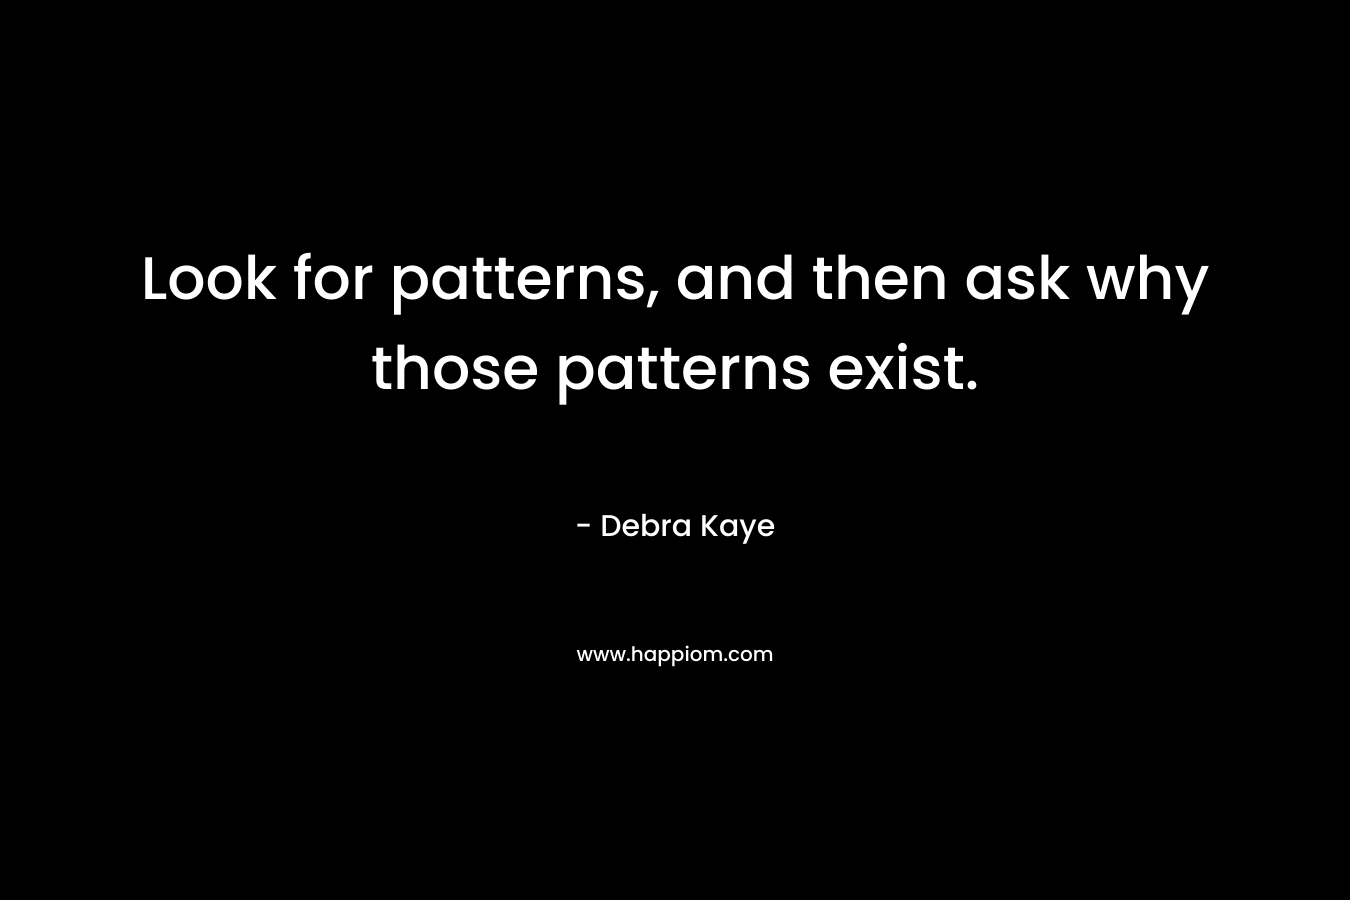 Look for patterns, and then ask why those patterns exist. – Debra Kaye